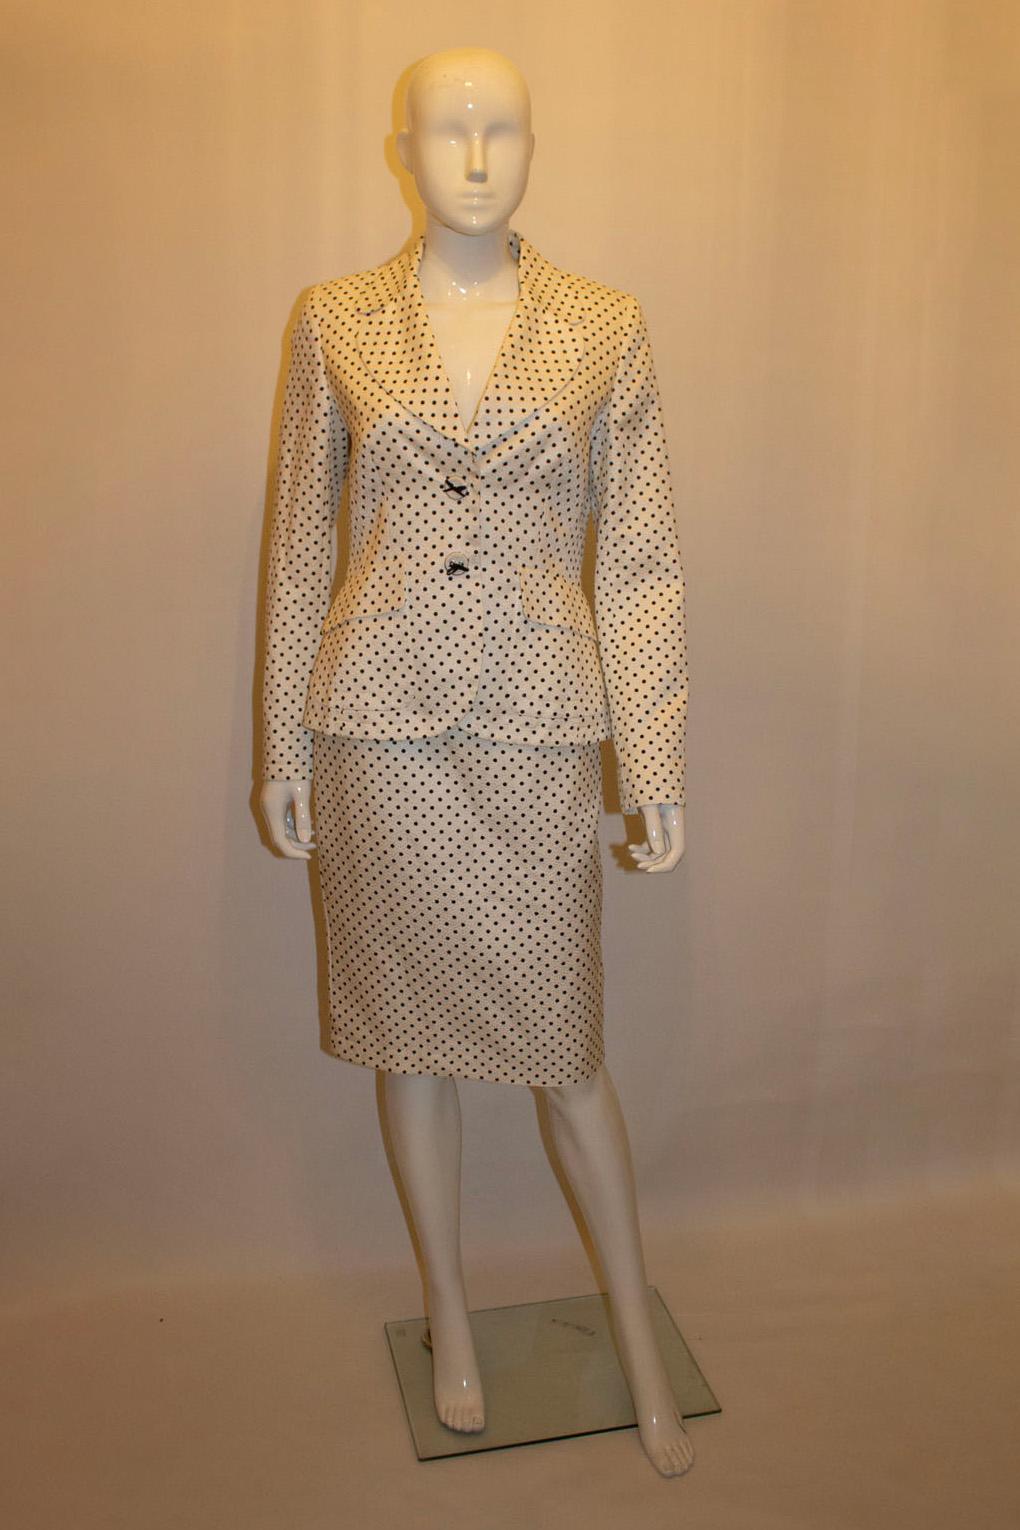 A headturning and fun skirt suit by Escada. In a lovely silk and cotton mix fabric, the outfit has a white background with black spots. The jacket has cut away lapels  and fastens with two decorative popper buttons, and has a pocket on either side.